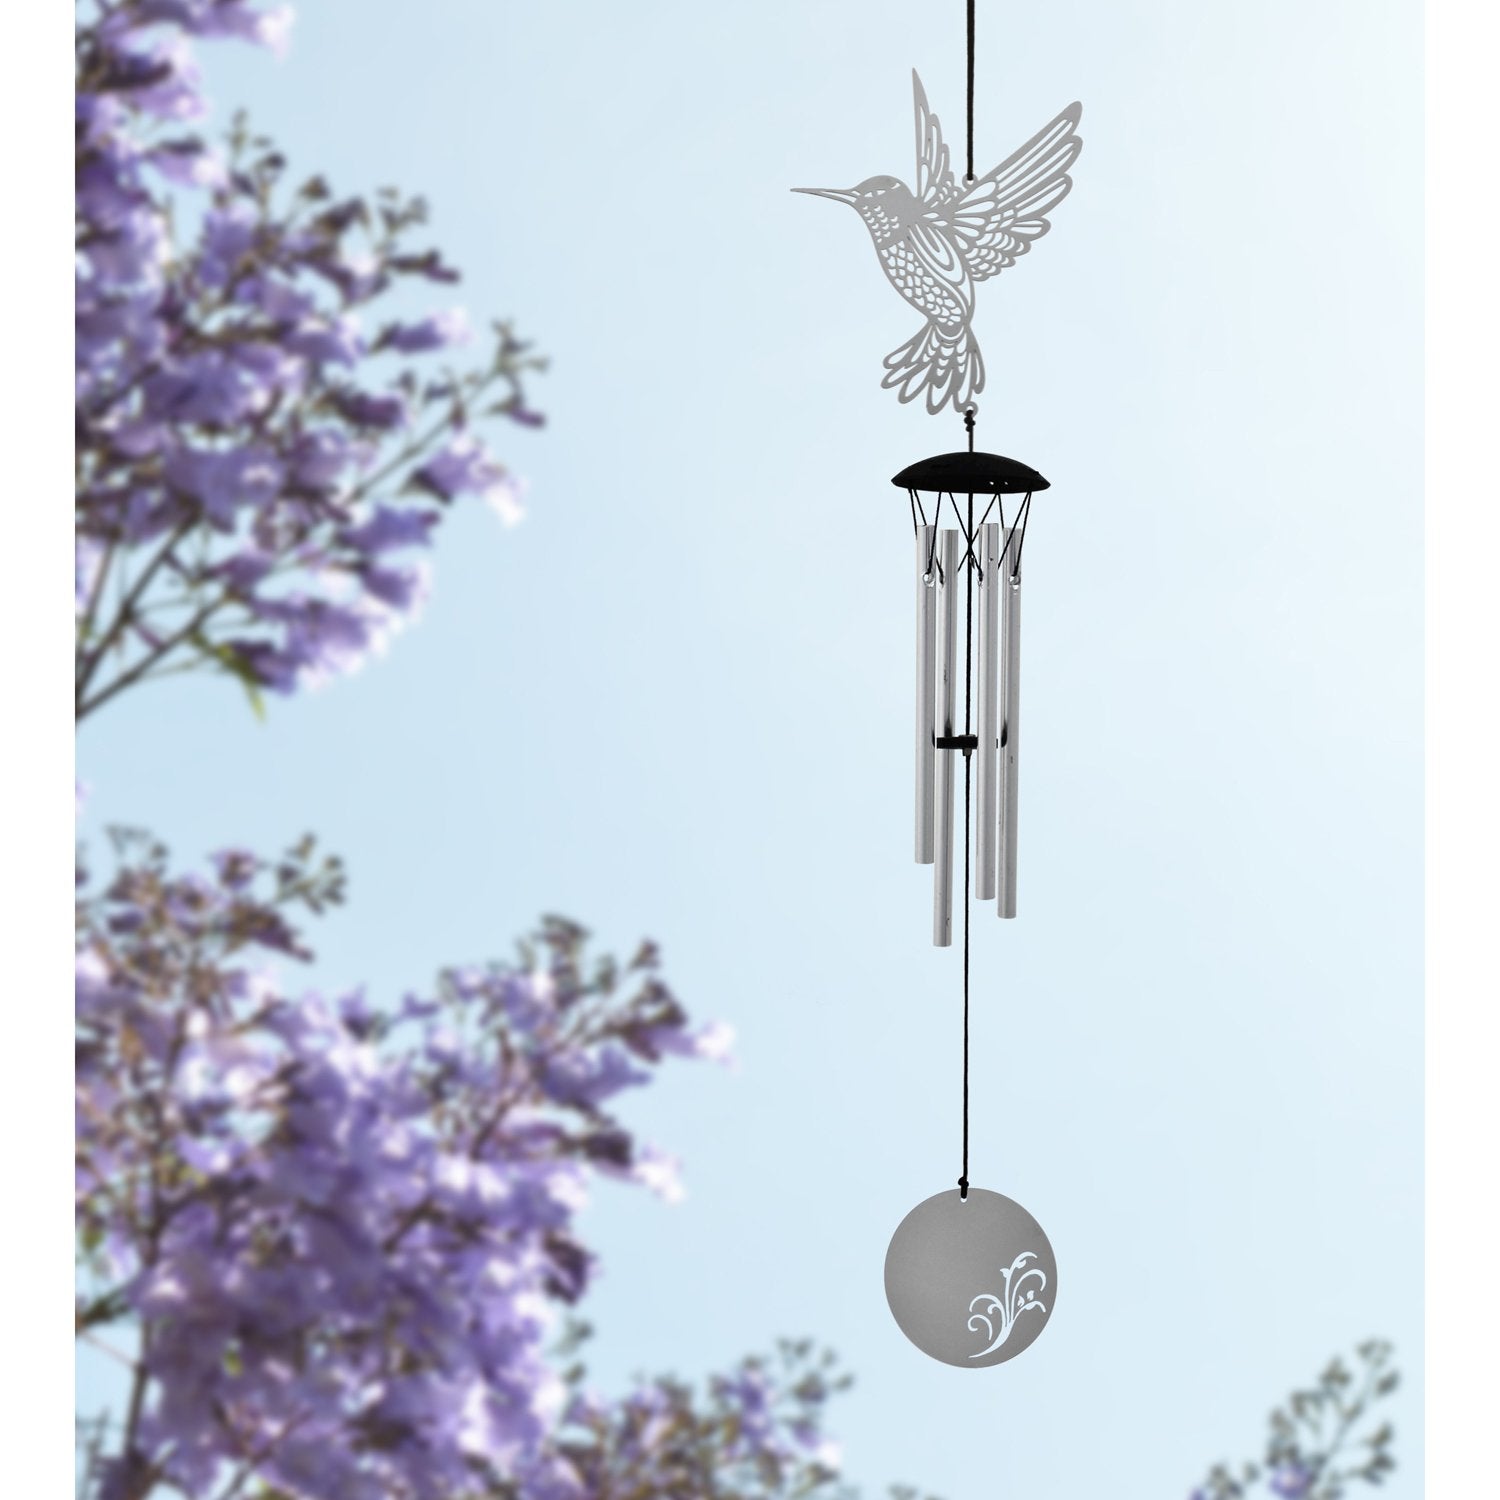 Woodstock Wind Chimes Signature Collection, Woodstock Flourish Chime, 18'' Hummingbird Silver Wind Chime FLHU - image 2 of 6